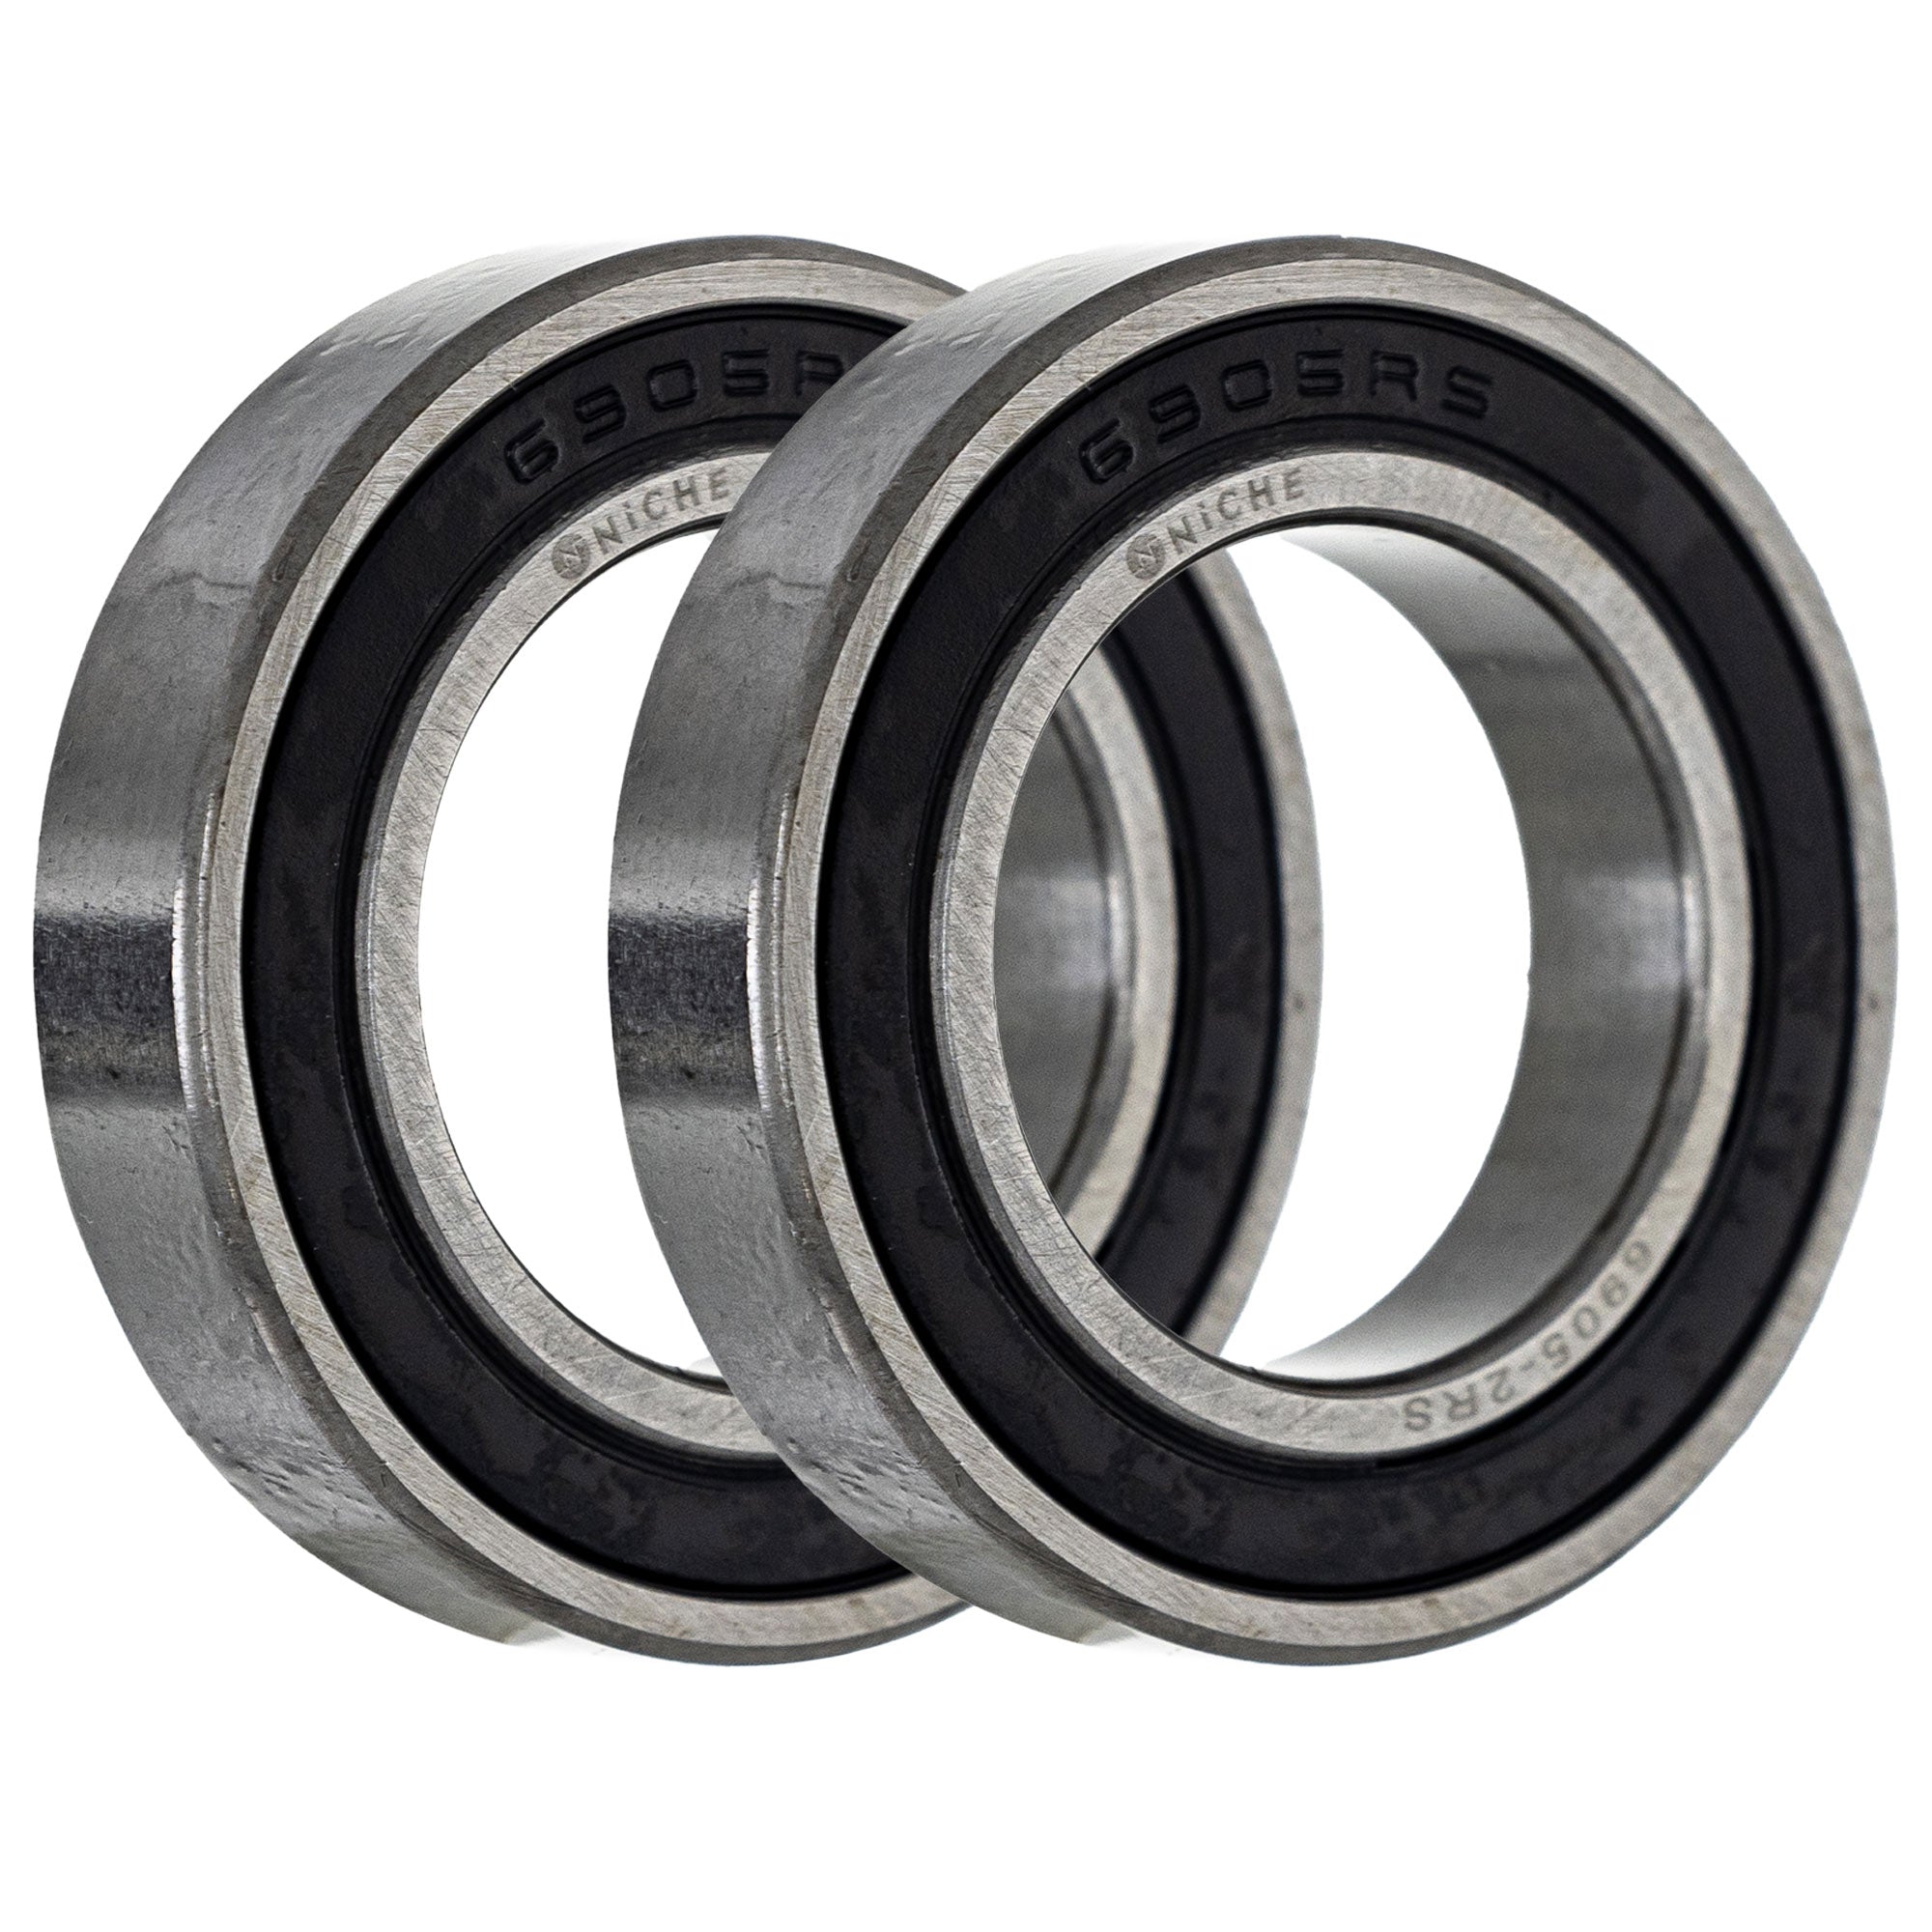 Single Row, Deep Groove, Ball Bearing Pack of 2 2-Pack for zOTHER ZZR600 Zephyr Z1000 W650 NICHE 519-CBB2251R